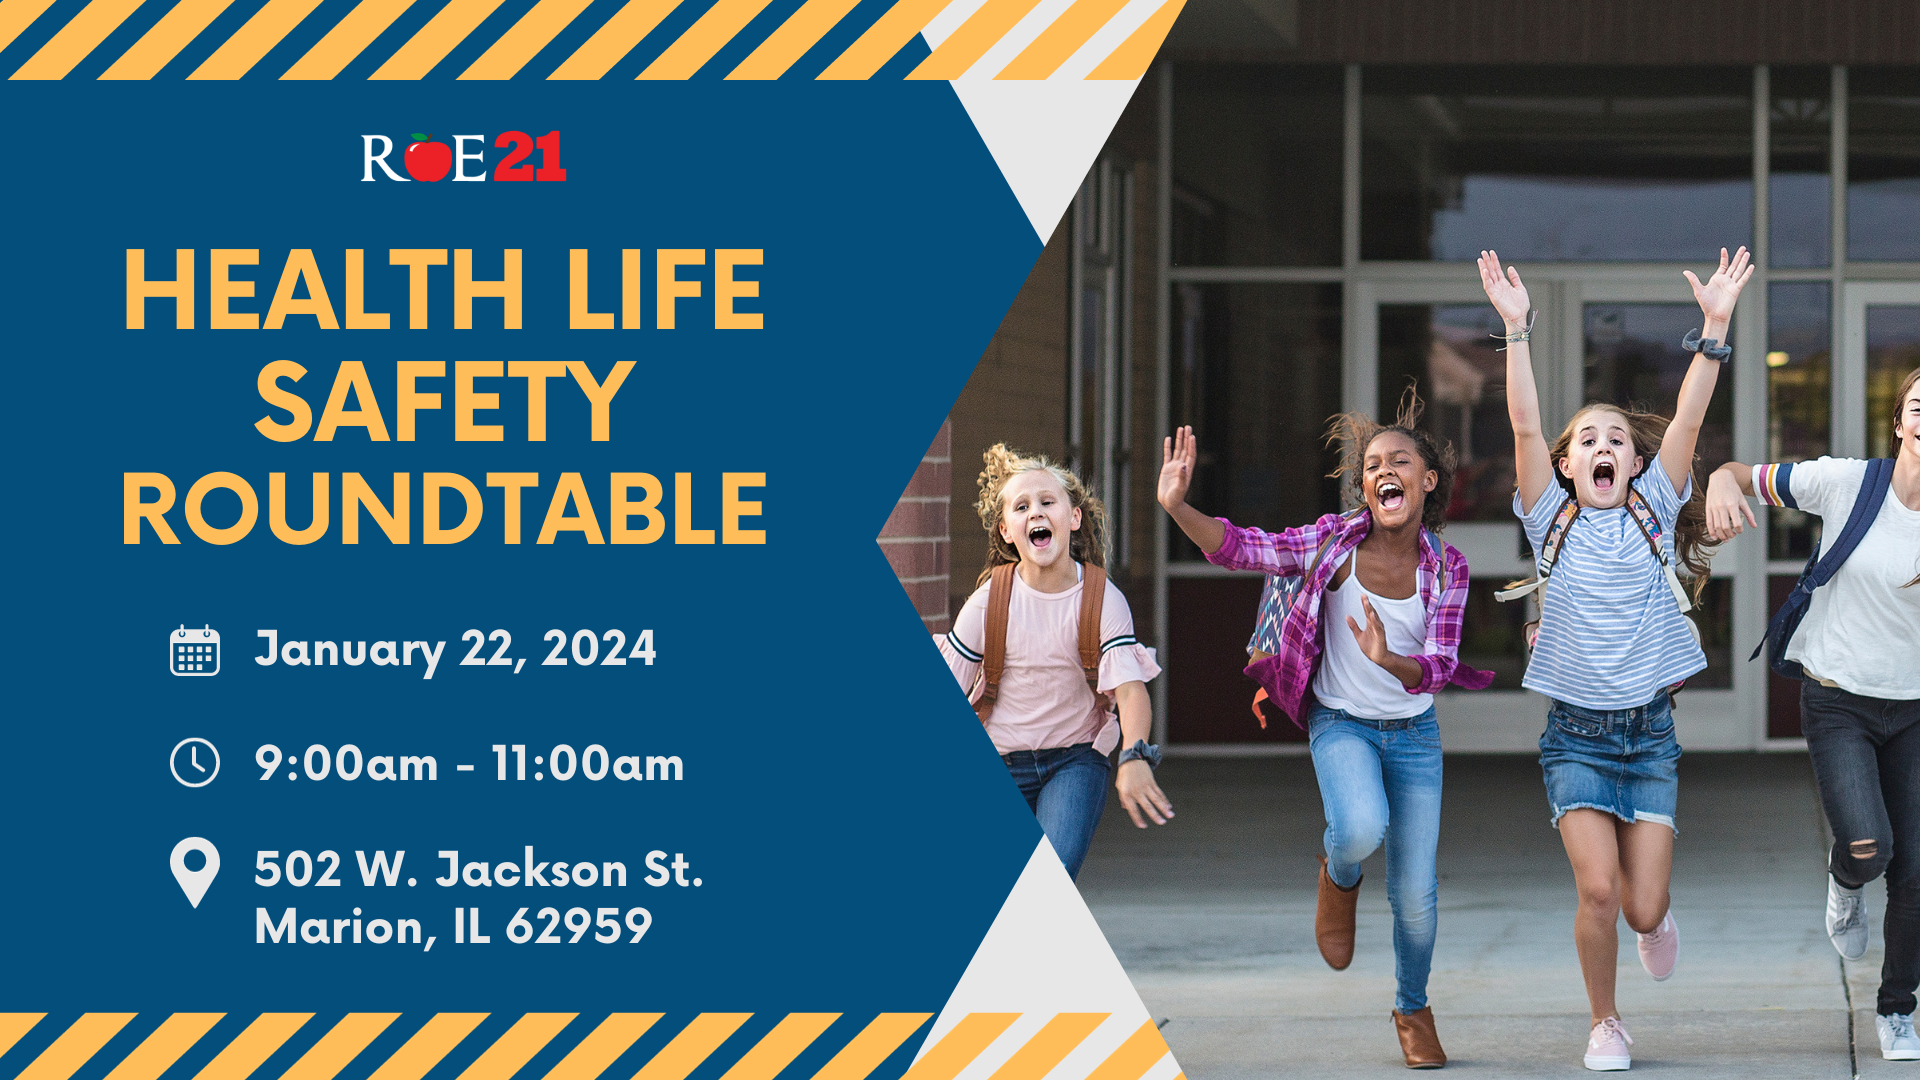 Health Life Safety Roundtable Flyer